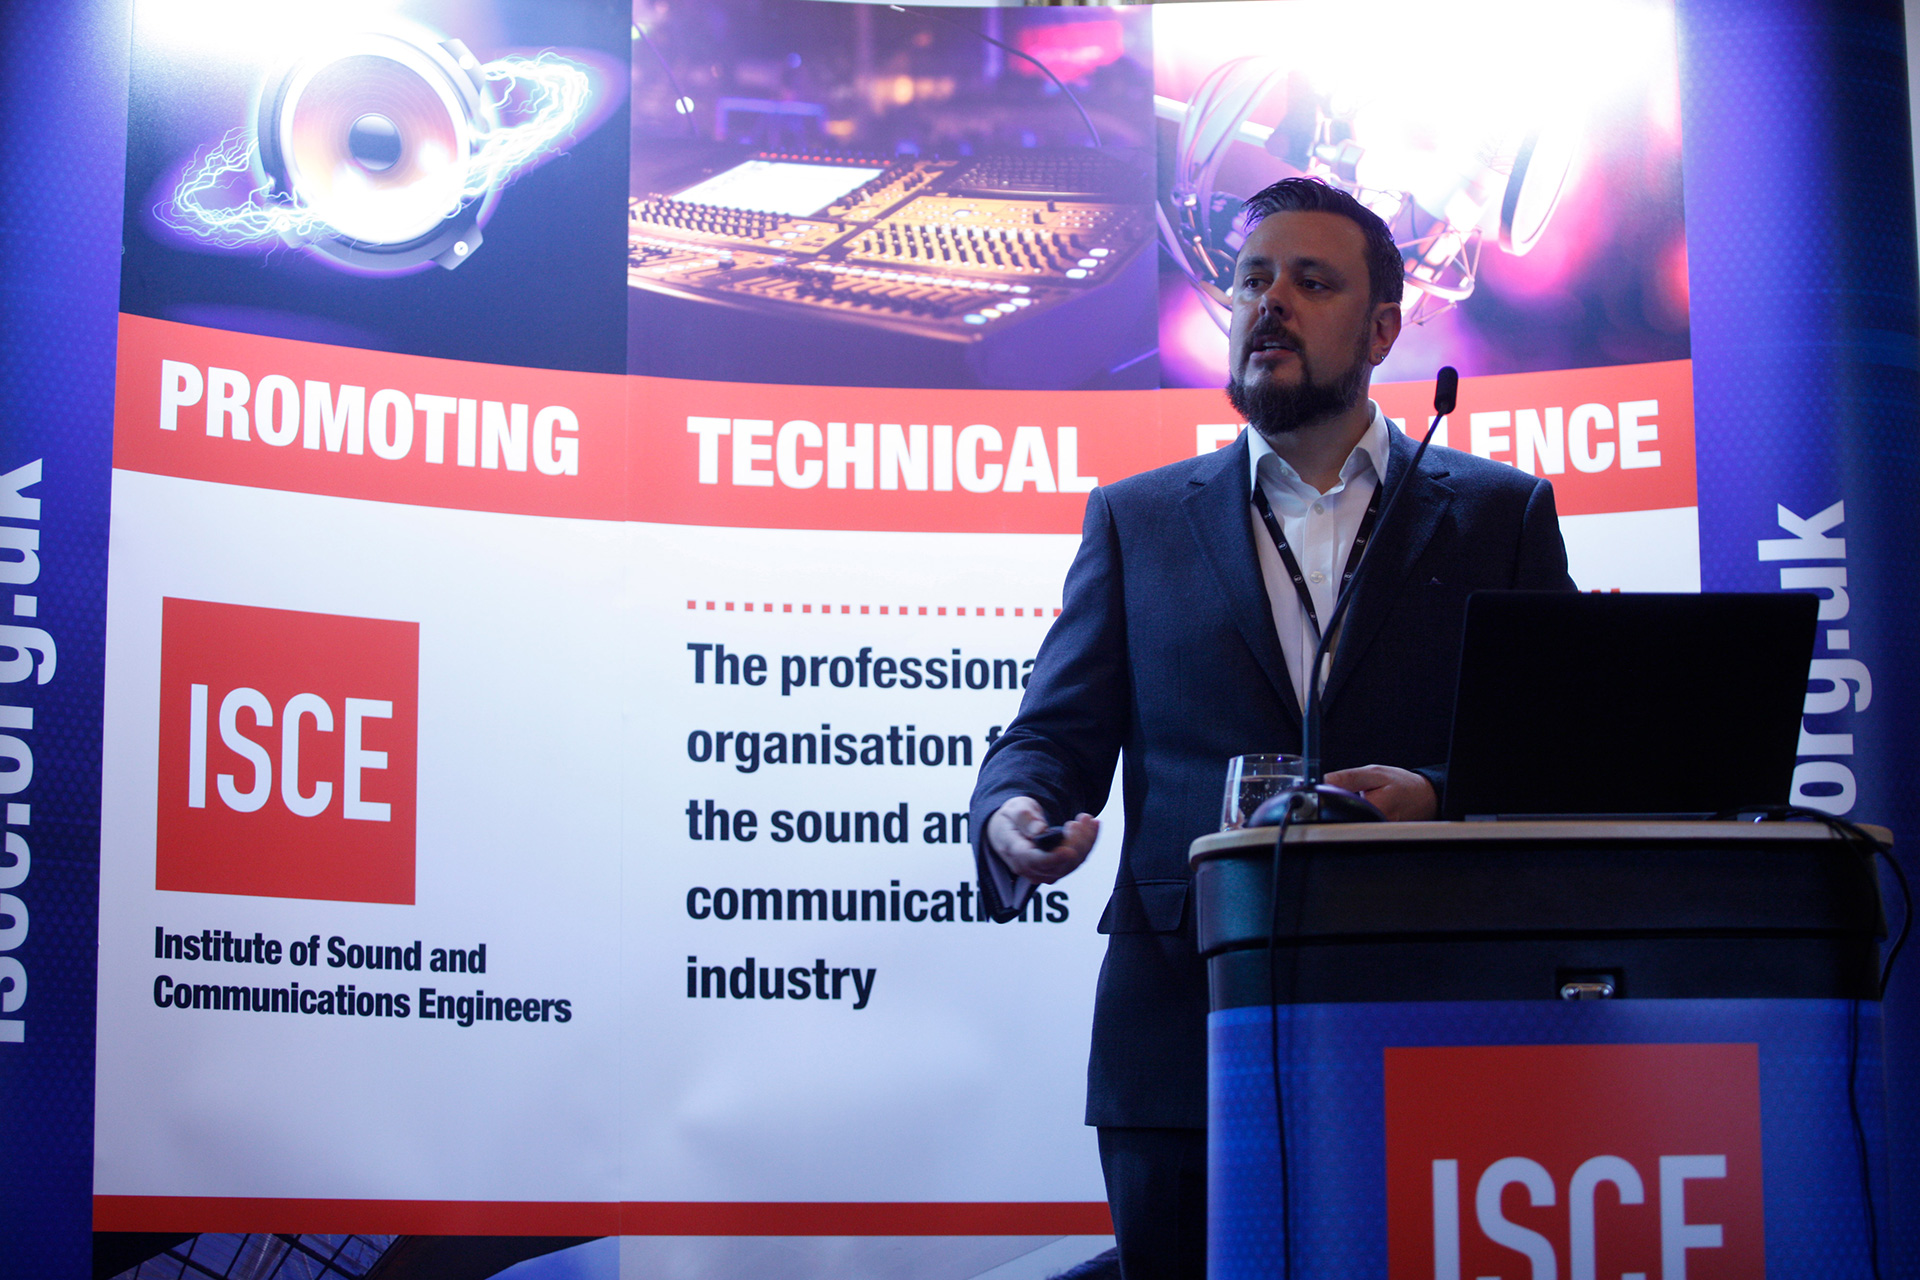 ISCEx 2019 wraps for another successful event